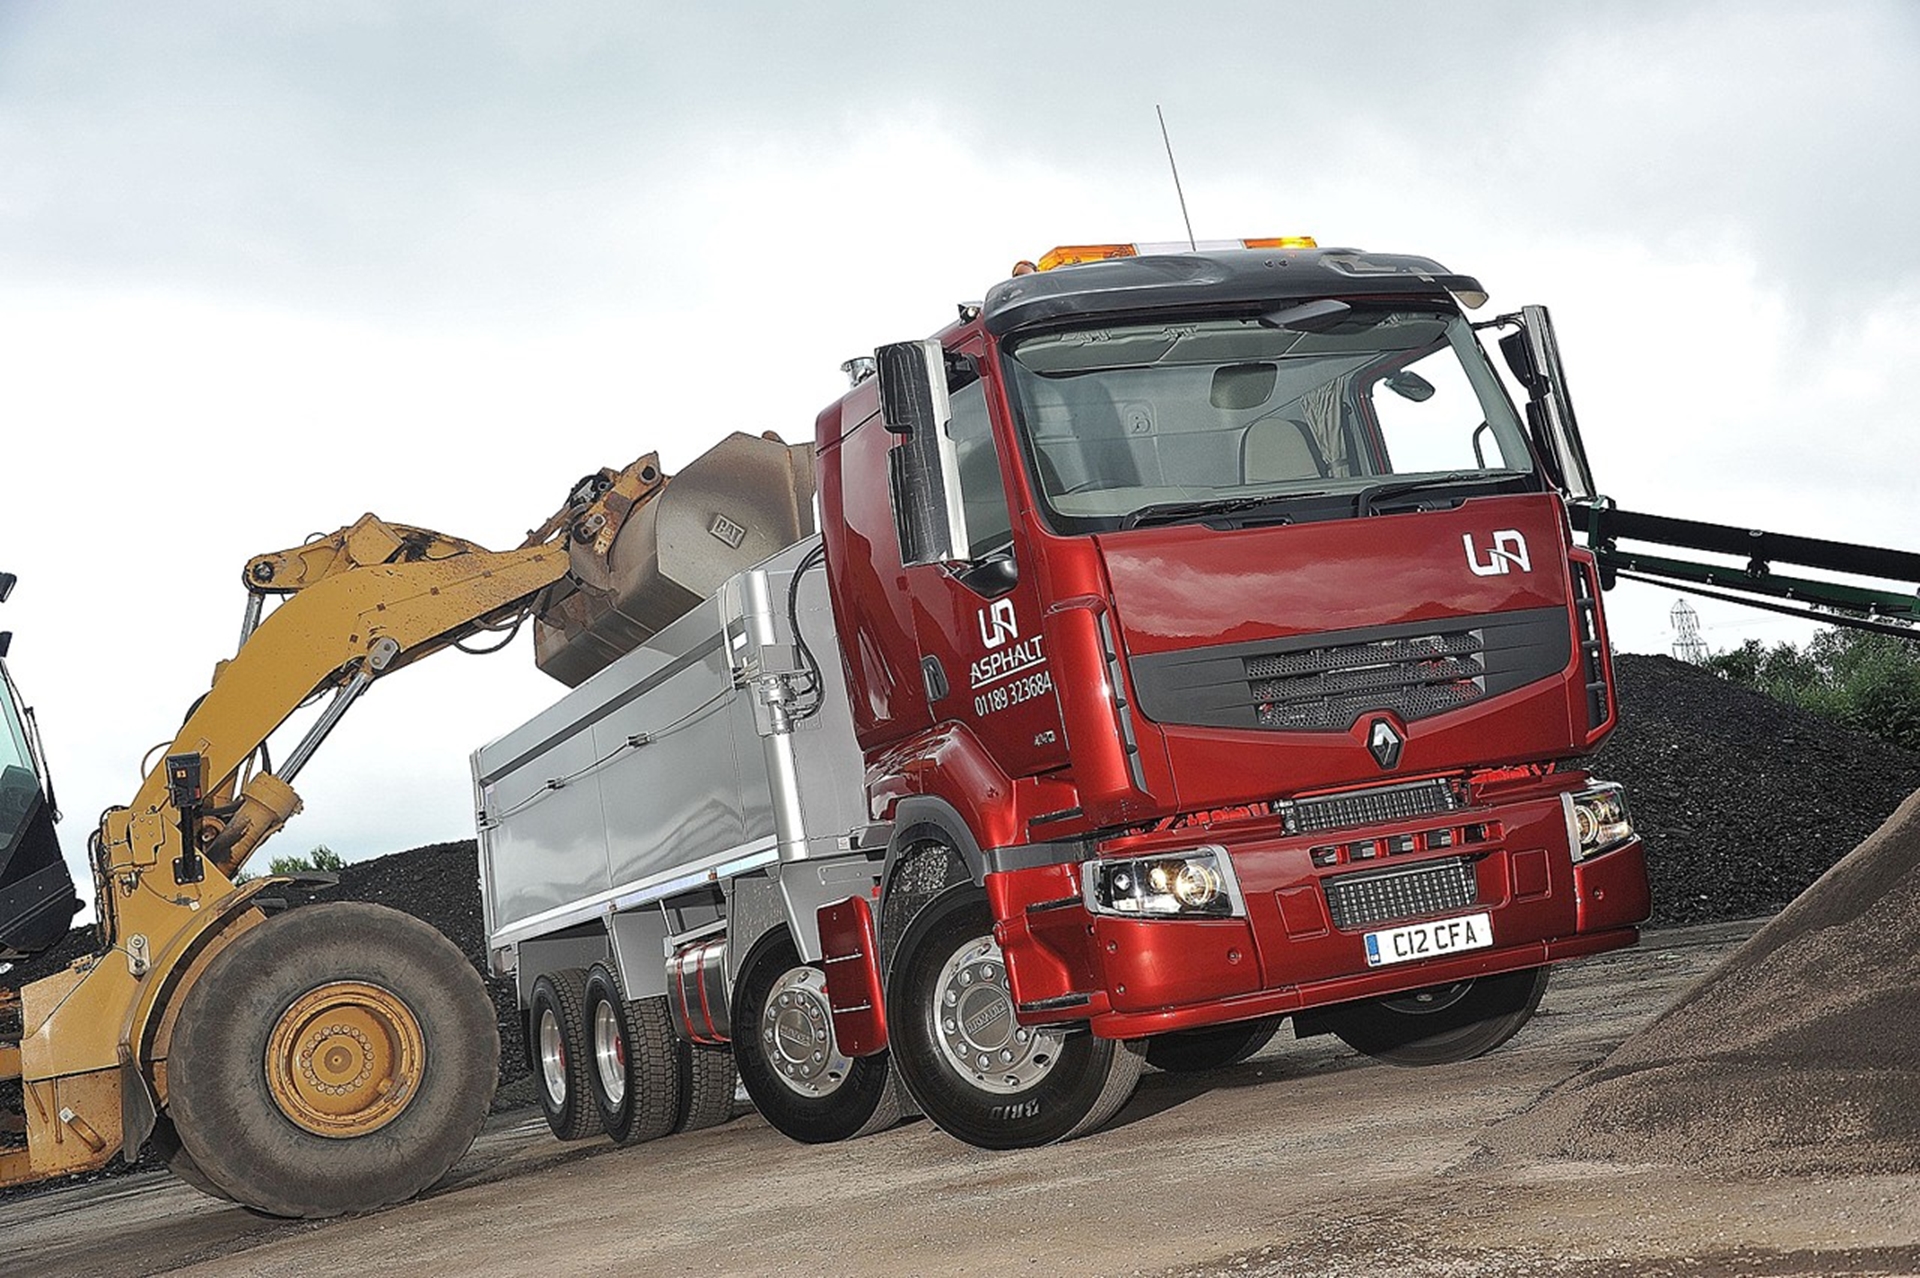 NEW RENAULT LANDER TURNS HEADS FOR C&A HAULAGE